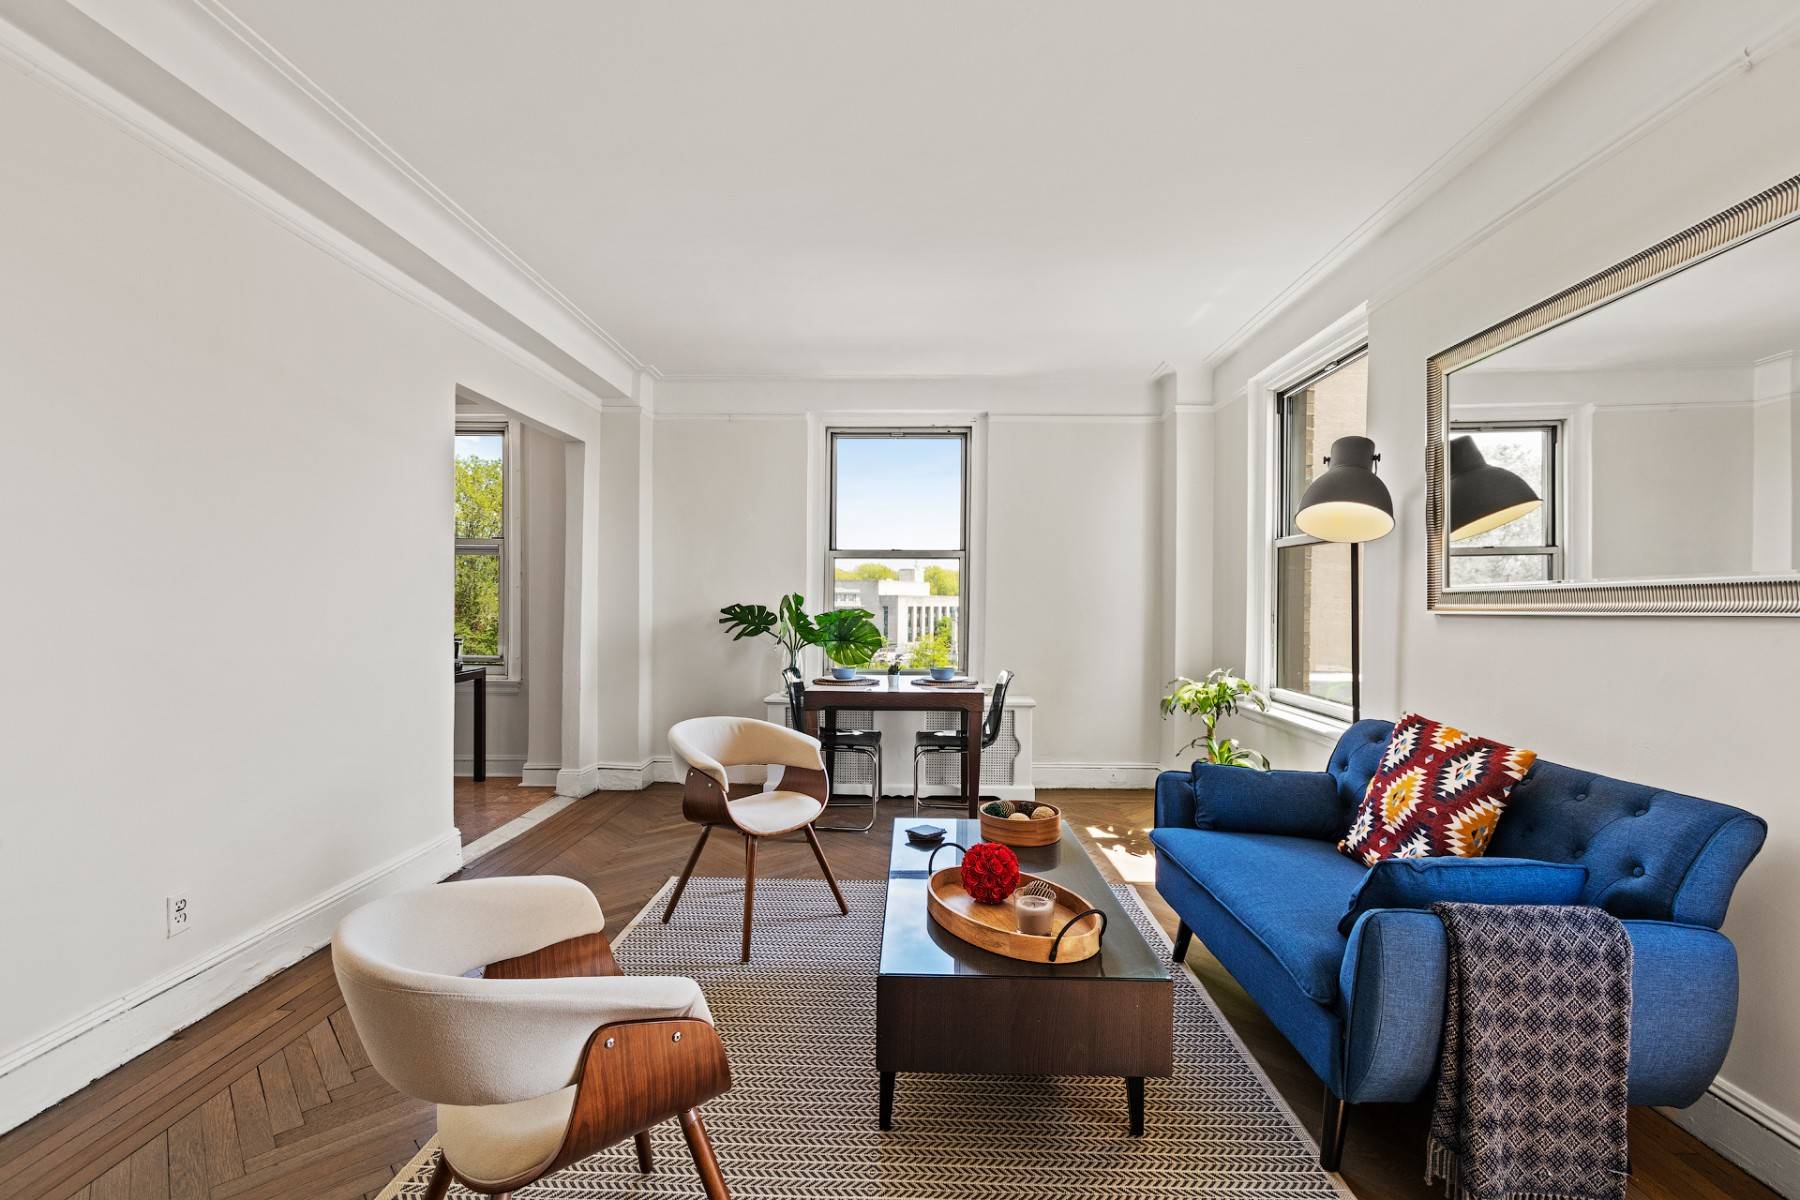 The ultimate in Park Slope luxury, 39 Plaza Street West offers the service one would expect in a prestigious pre war building designed by architect Rosario Candela, such as live ...